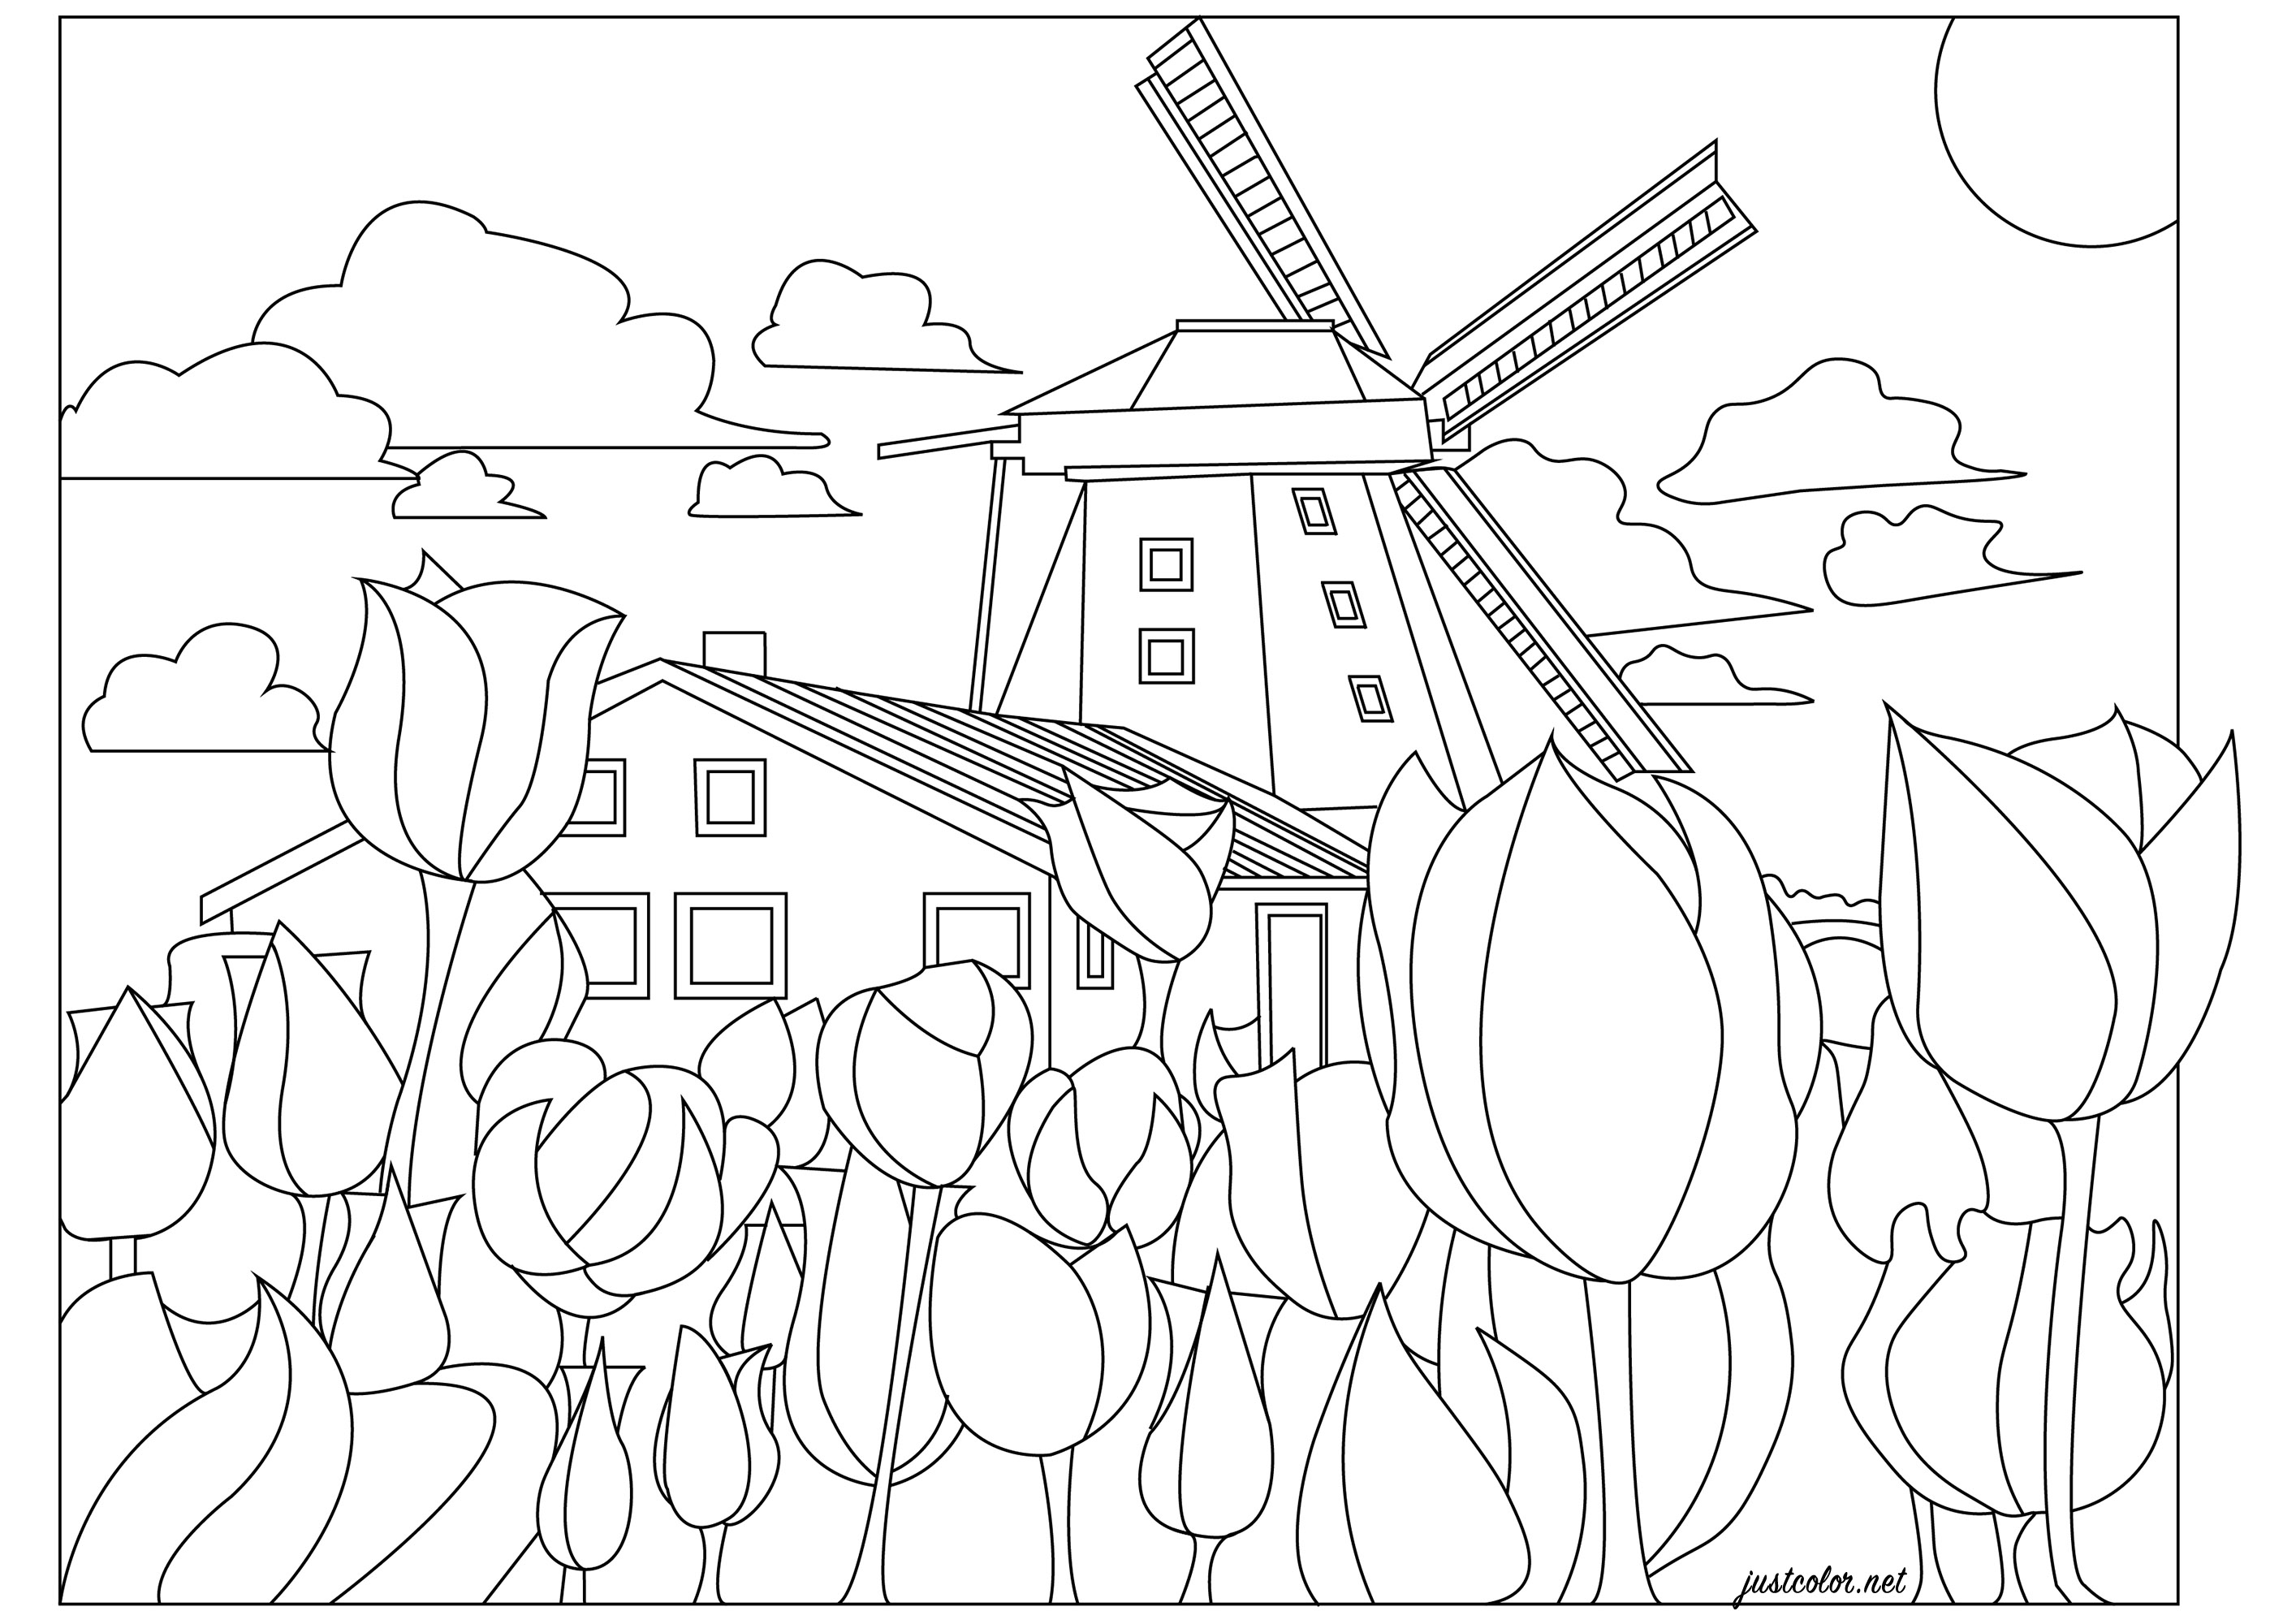 The Netherlands, the land of windmills and tulip fields. The Dutch countryside in springtime! A coloring page with tulips in a thousand colors (of your choice), a windmill and a typical Dutch house, Artist : Morgan